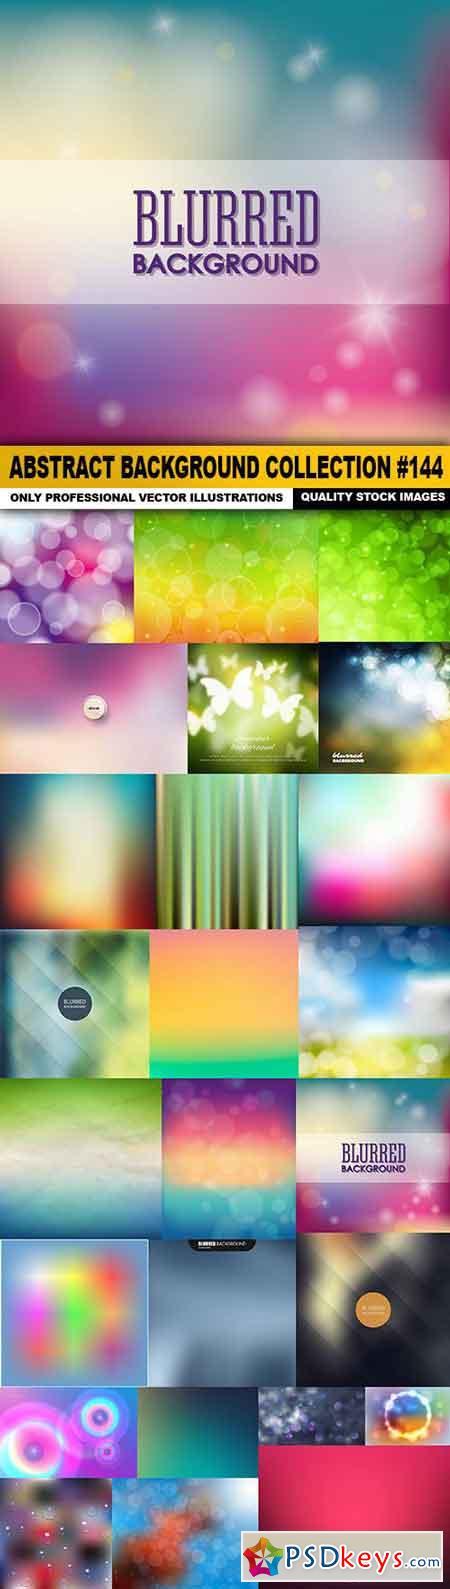 Abstract Background Collection #144 - 25 Vector